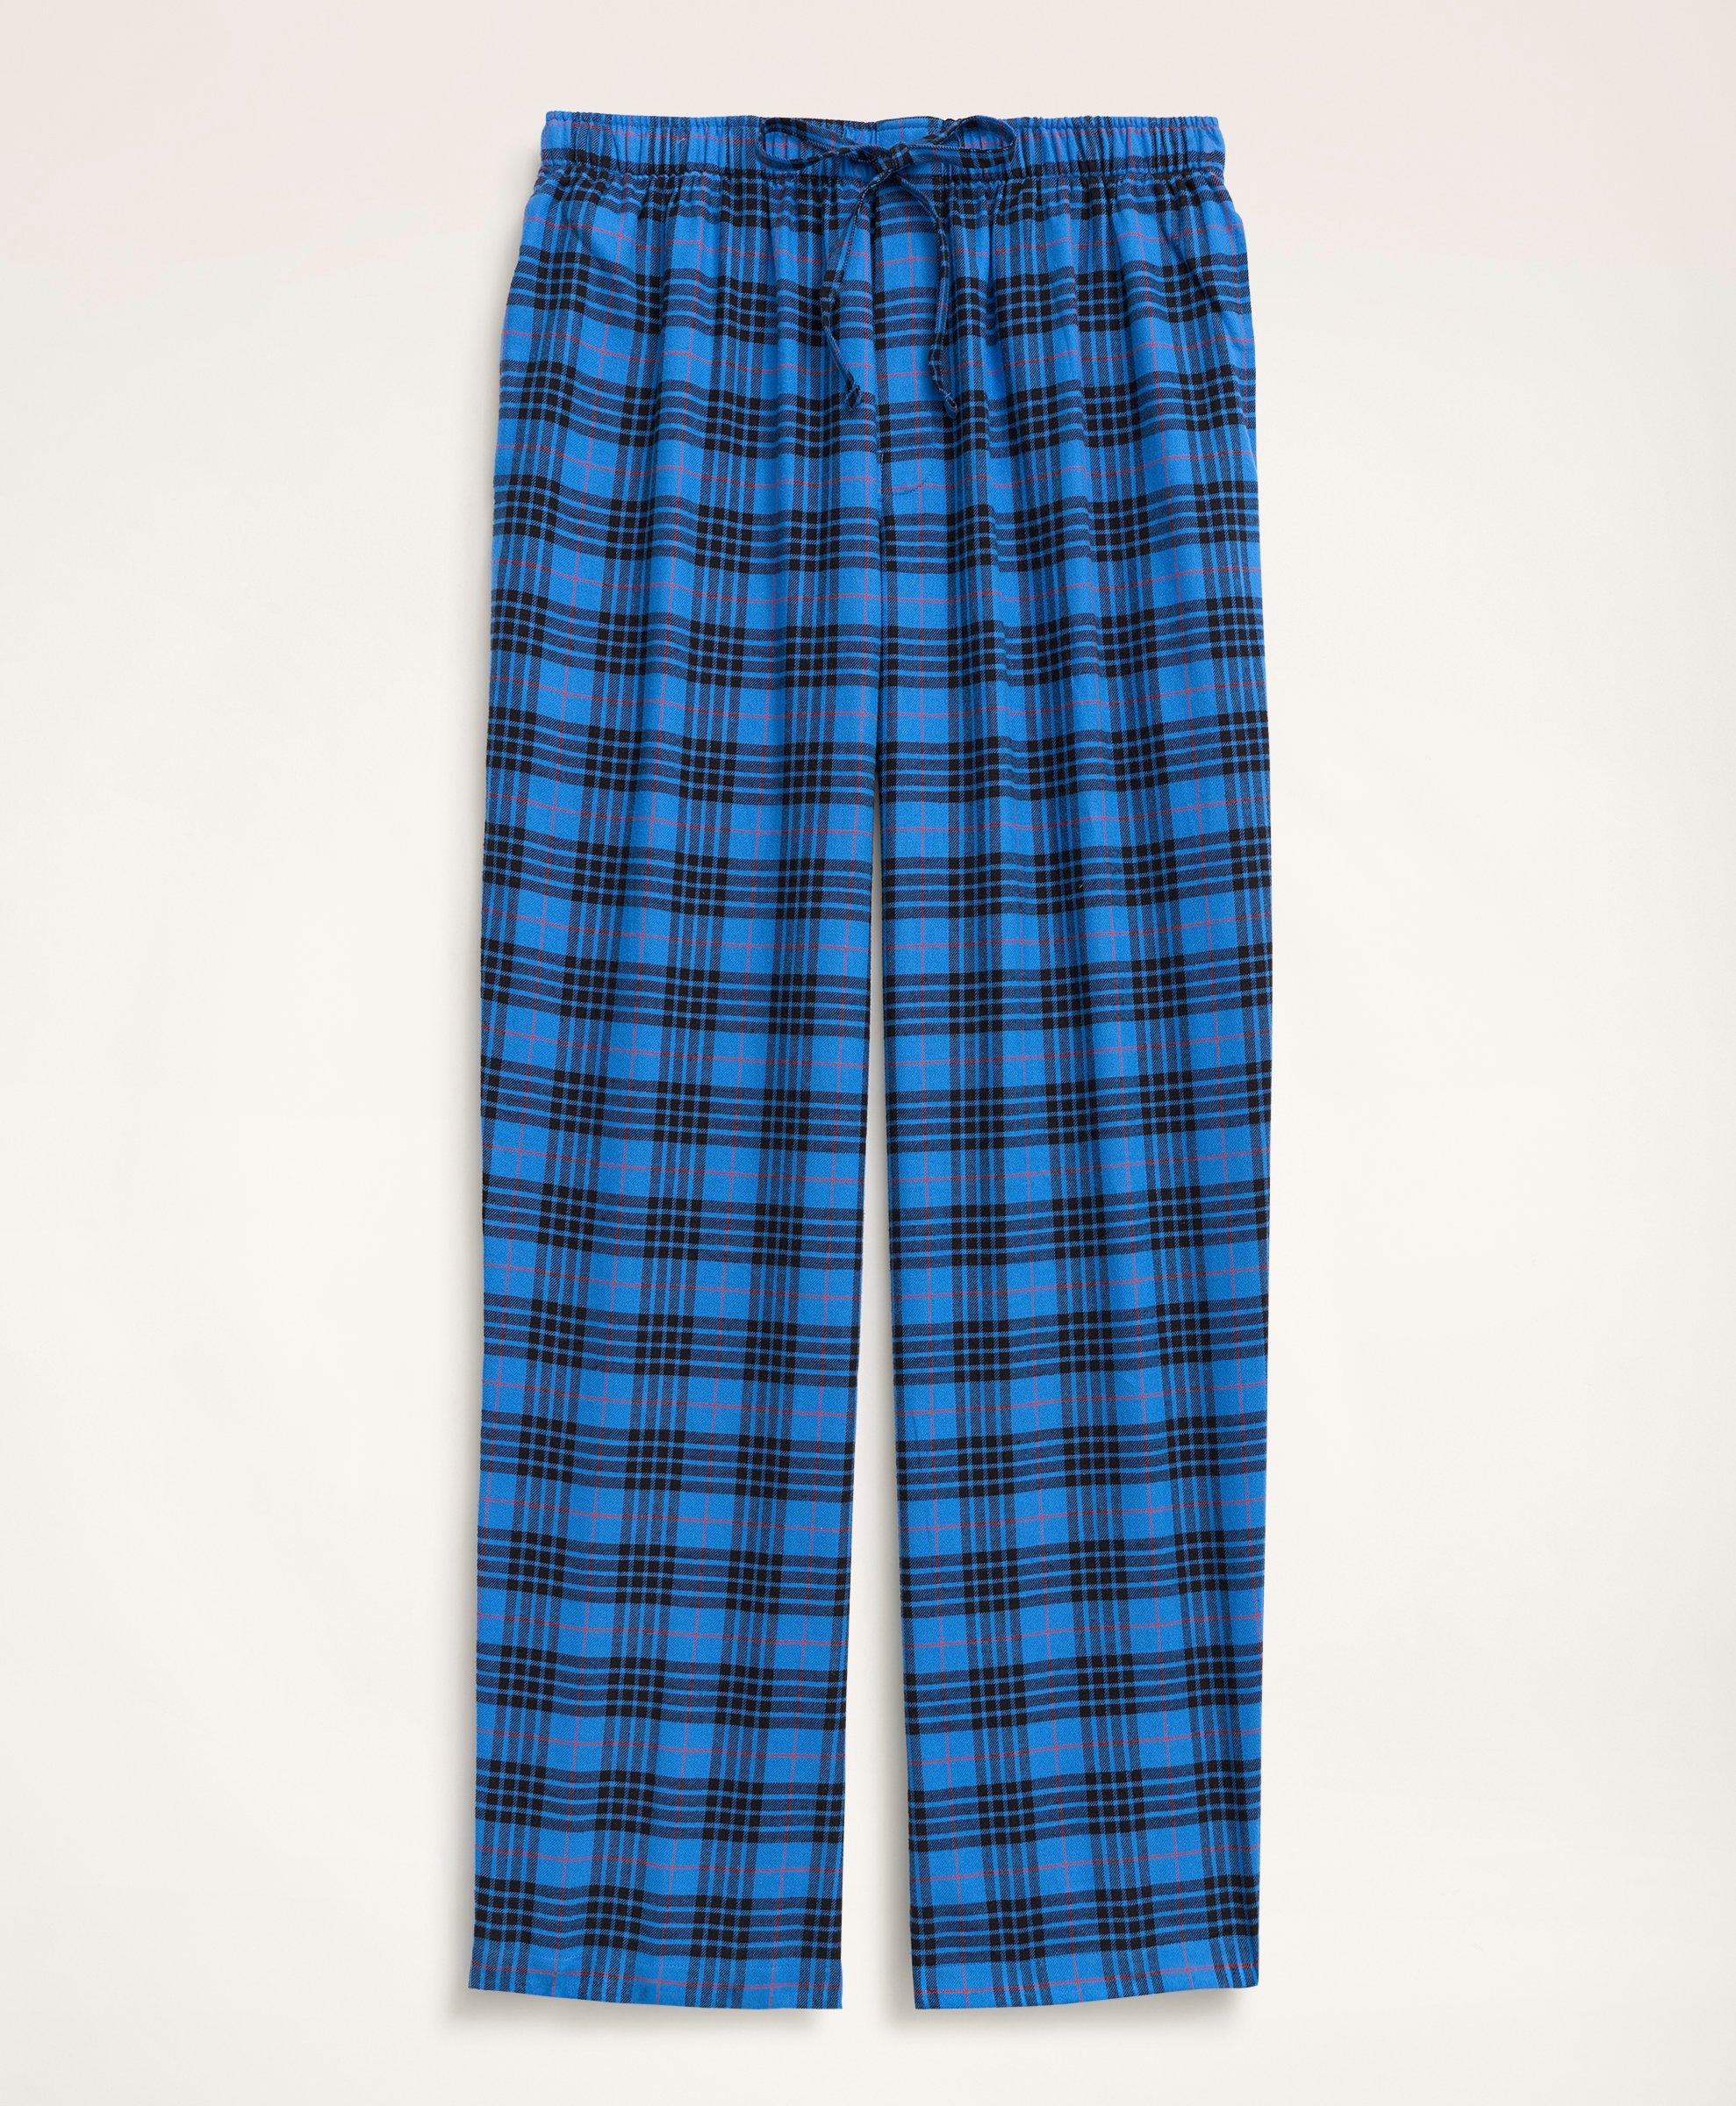 Flannel Lined Pants